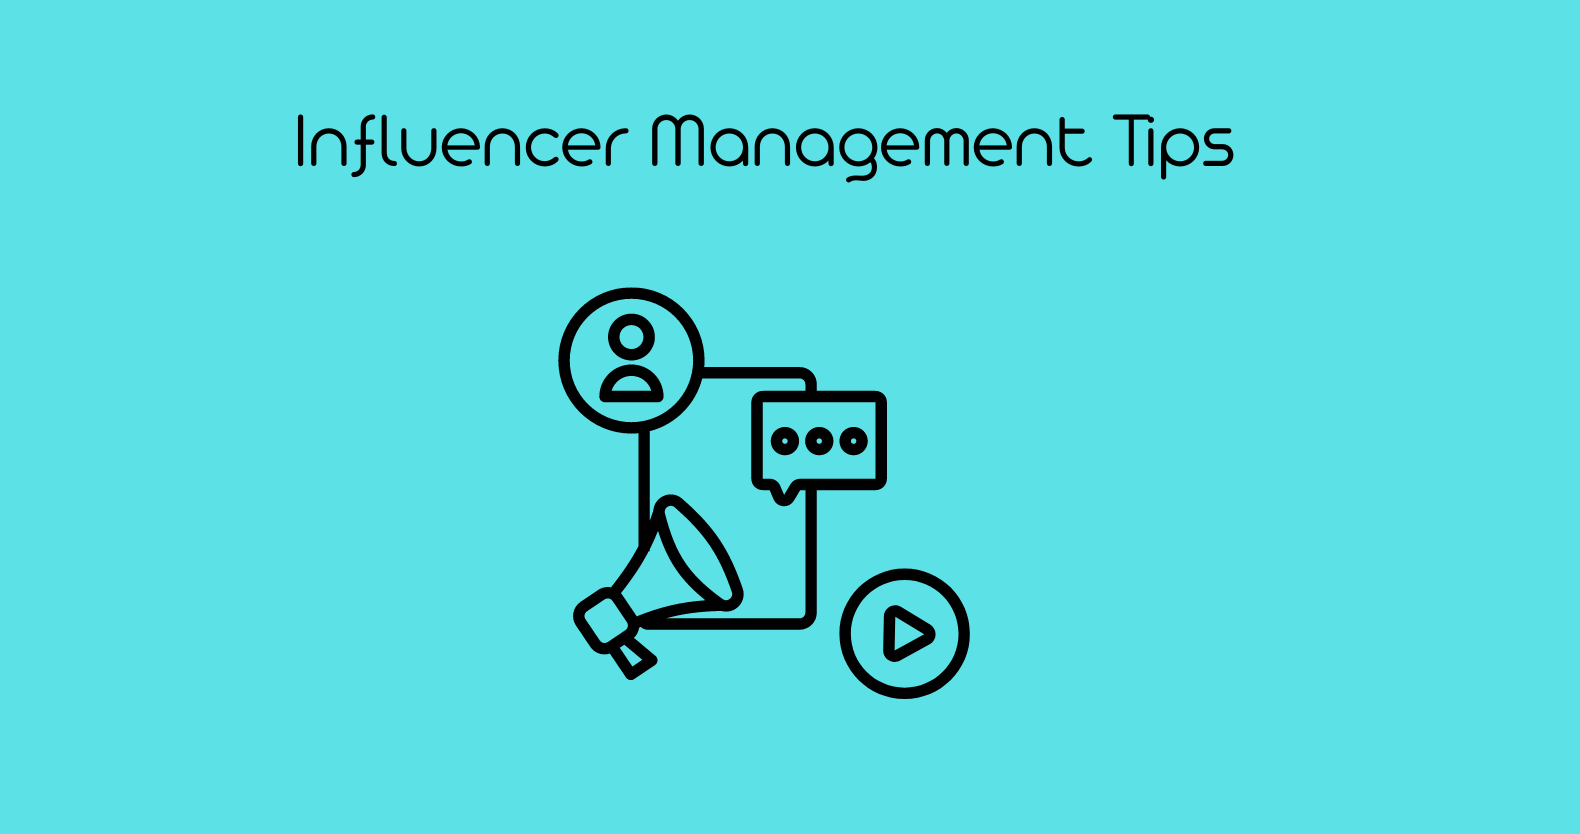 Influencer Management Everything You Need to Know